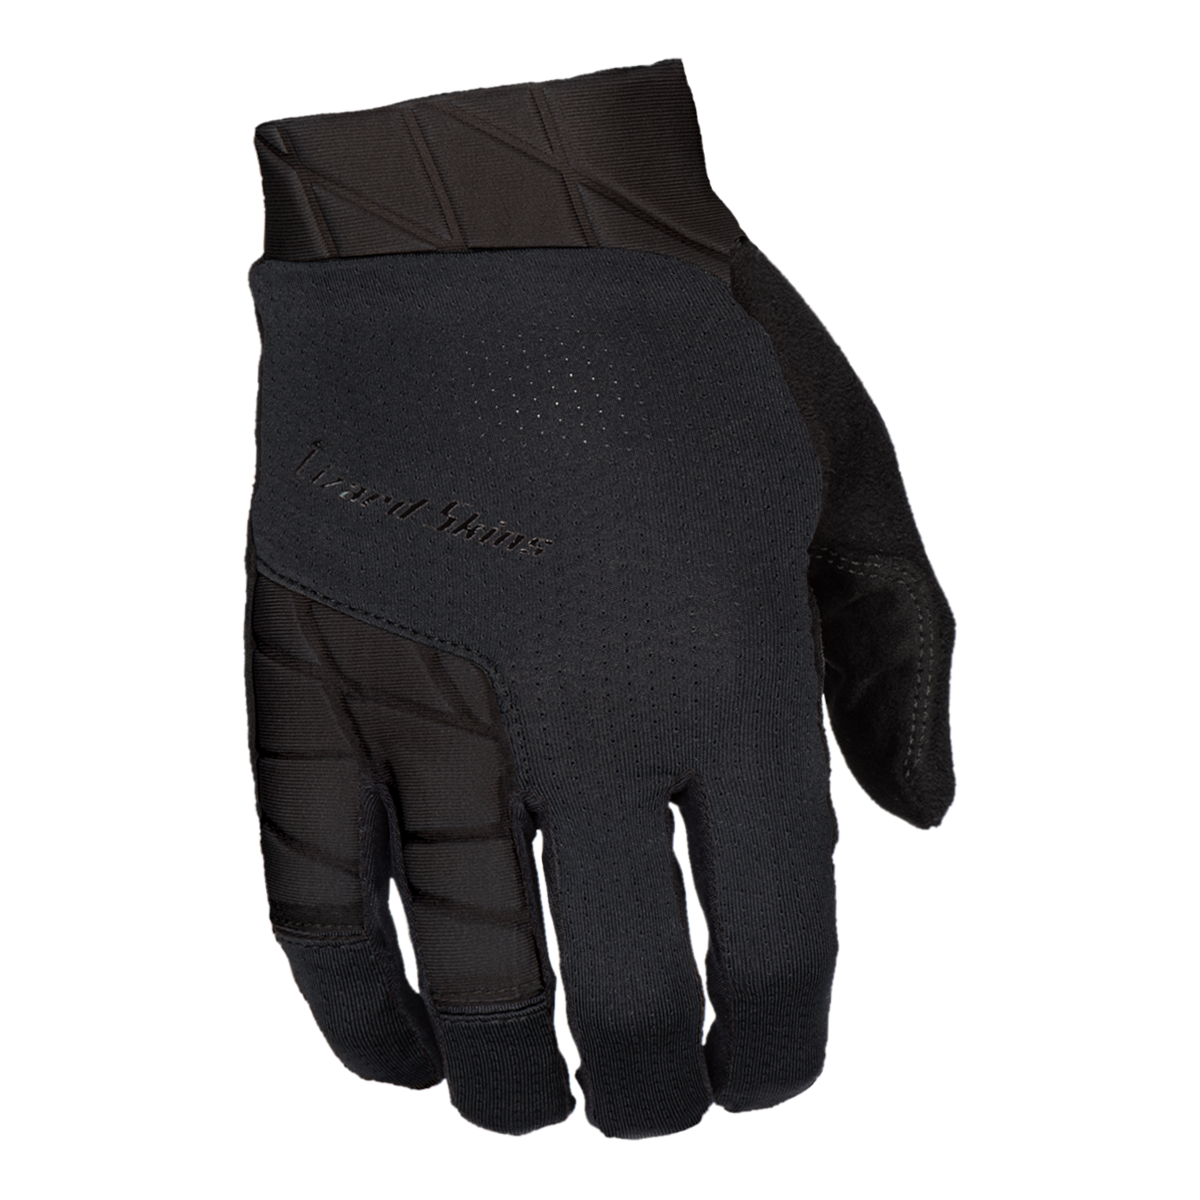 Lizard Skins Guantes Monitor OPS